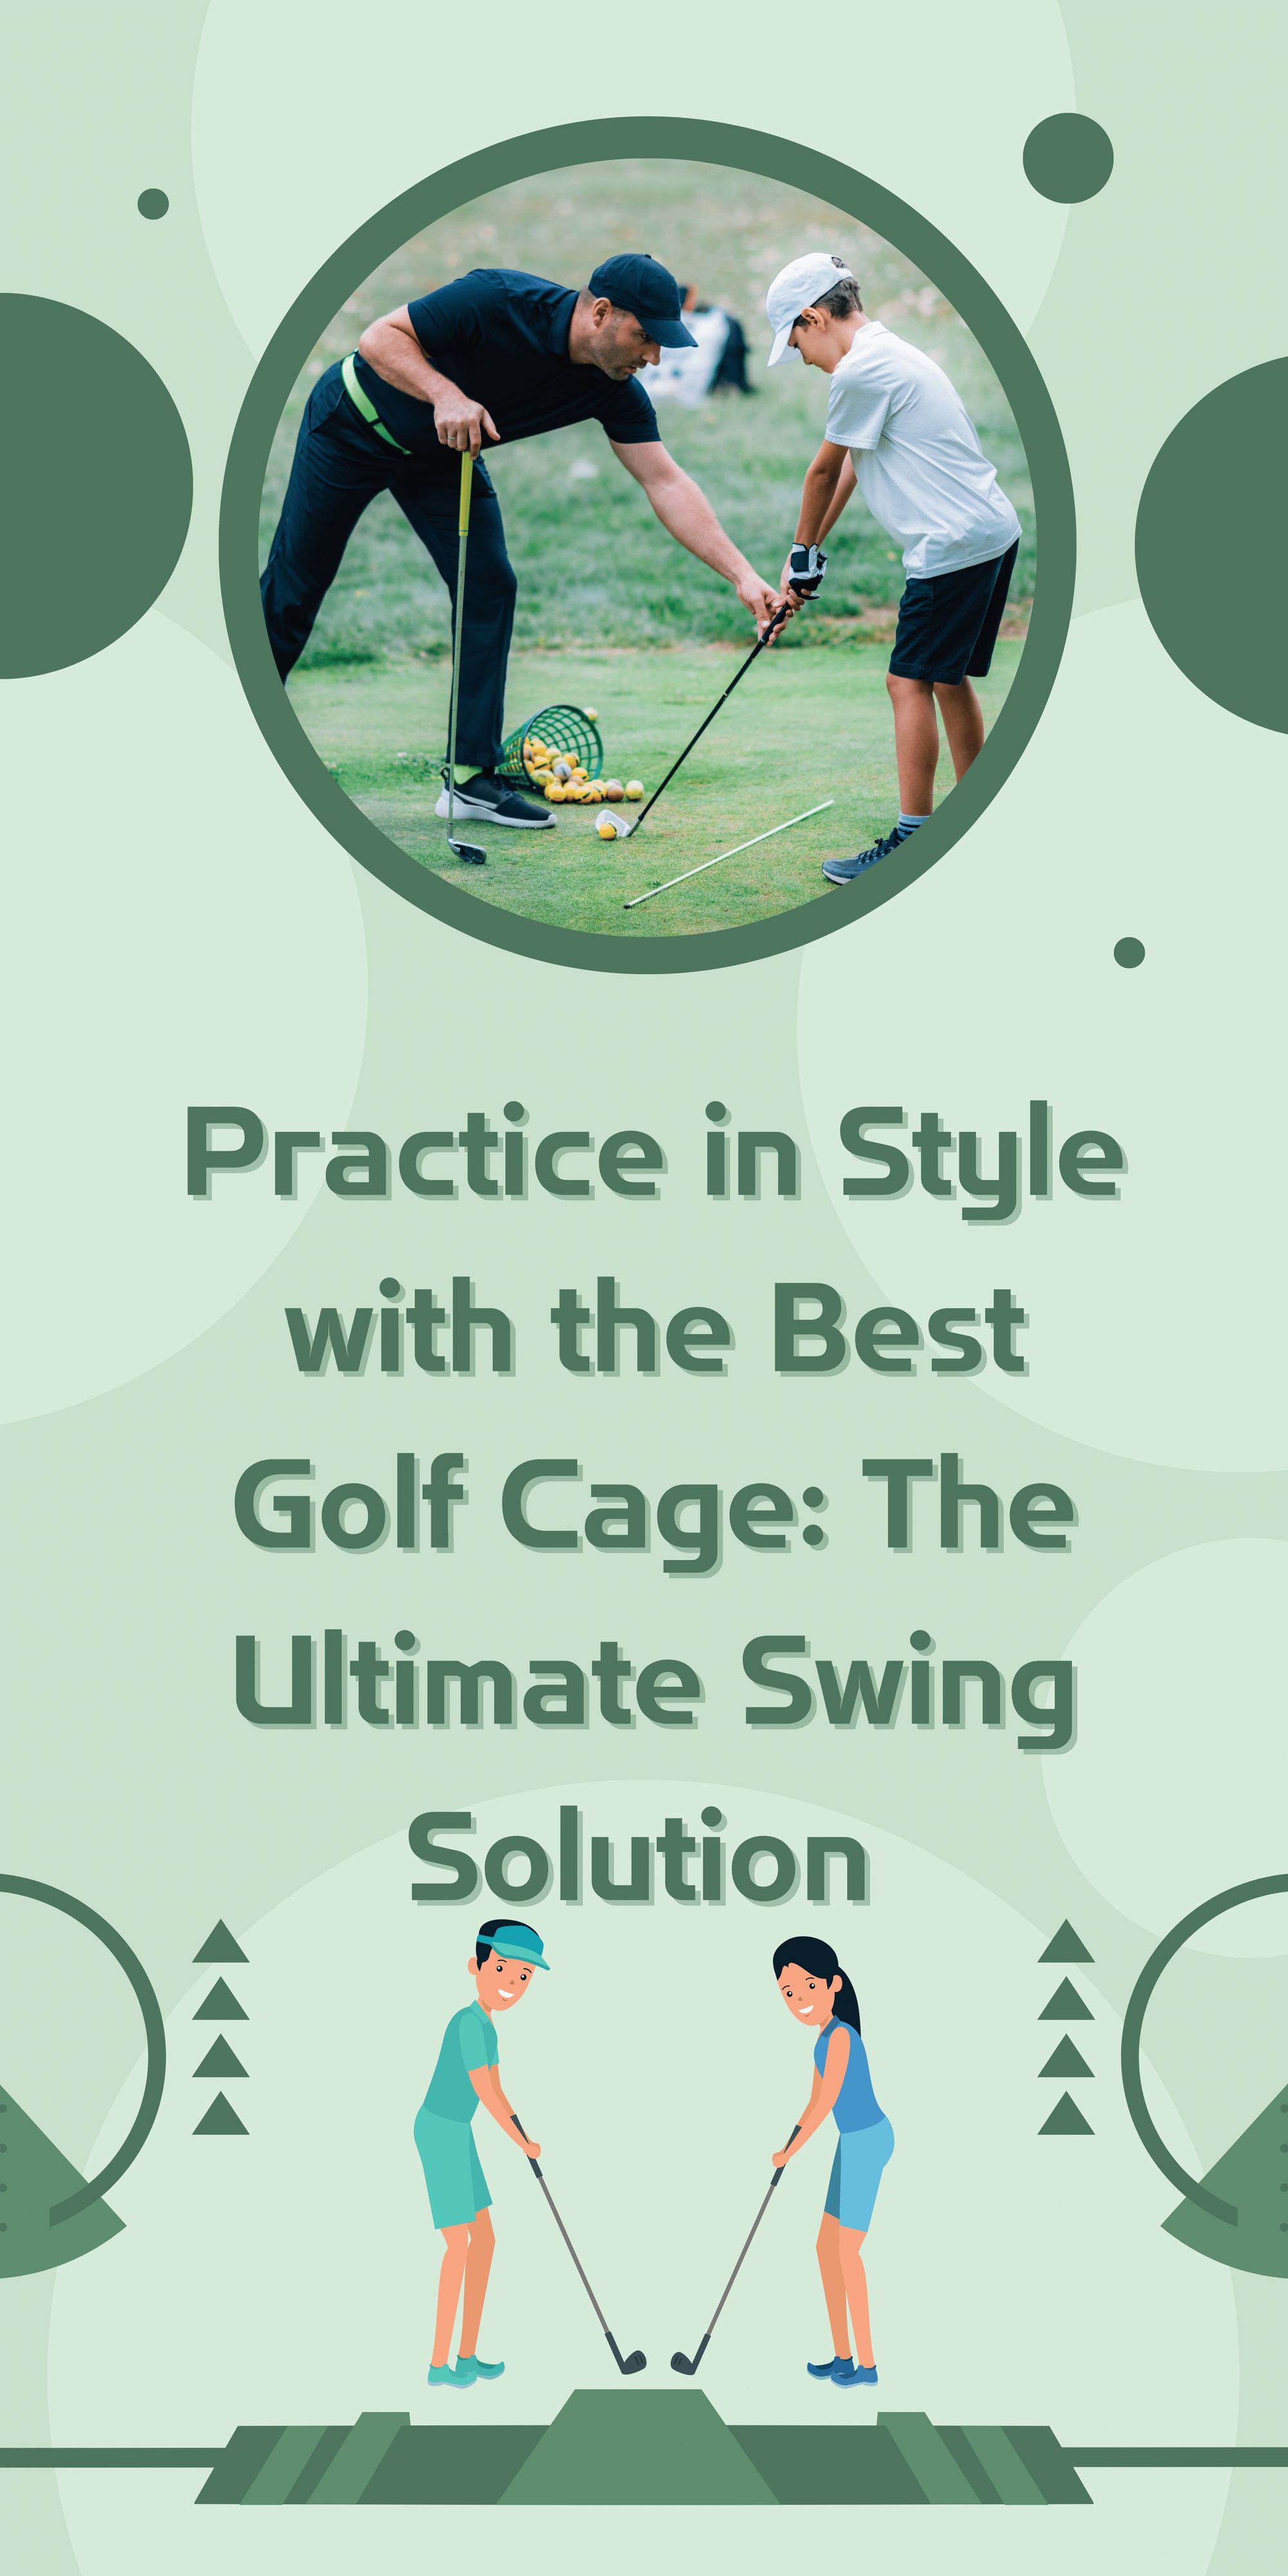 Practice in Style with the Best Golf Cage Today